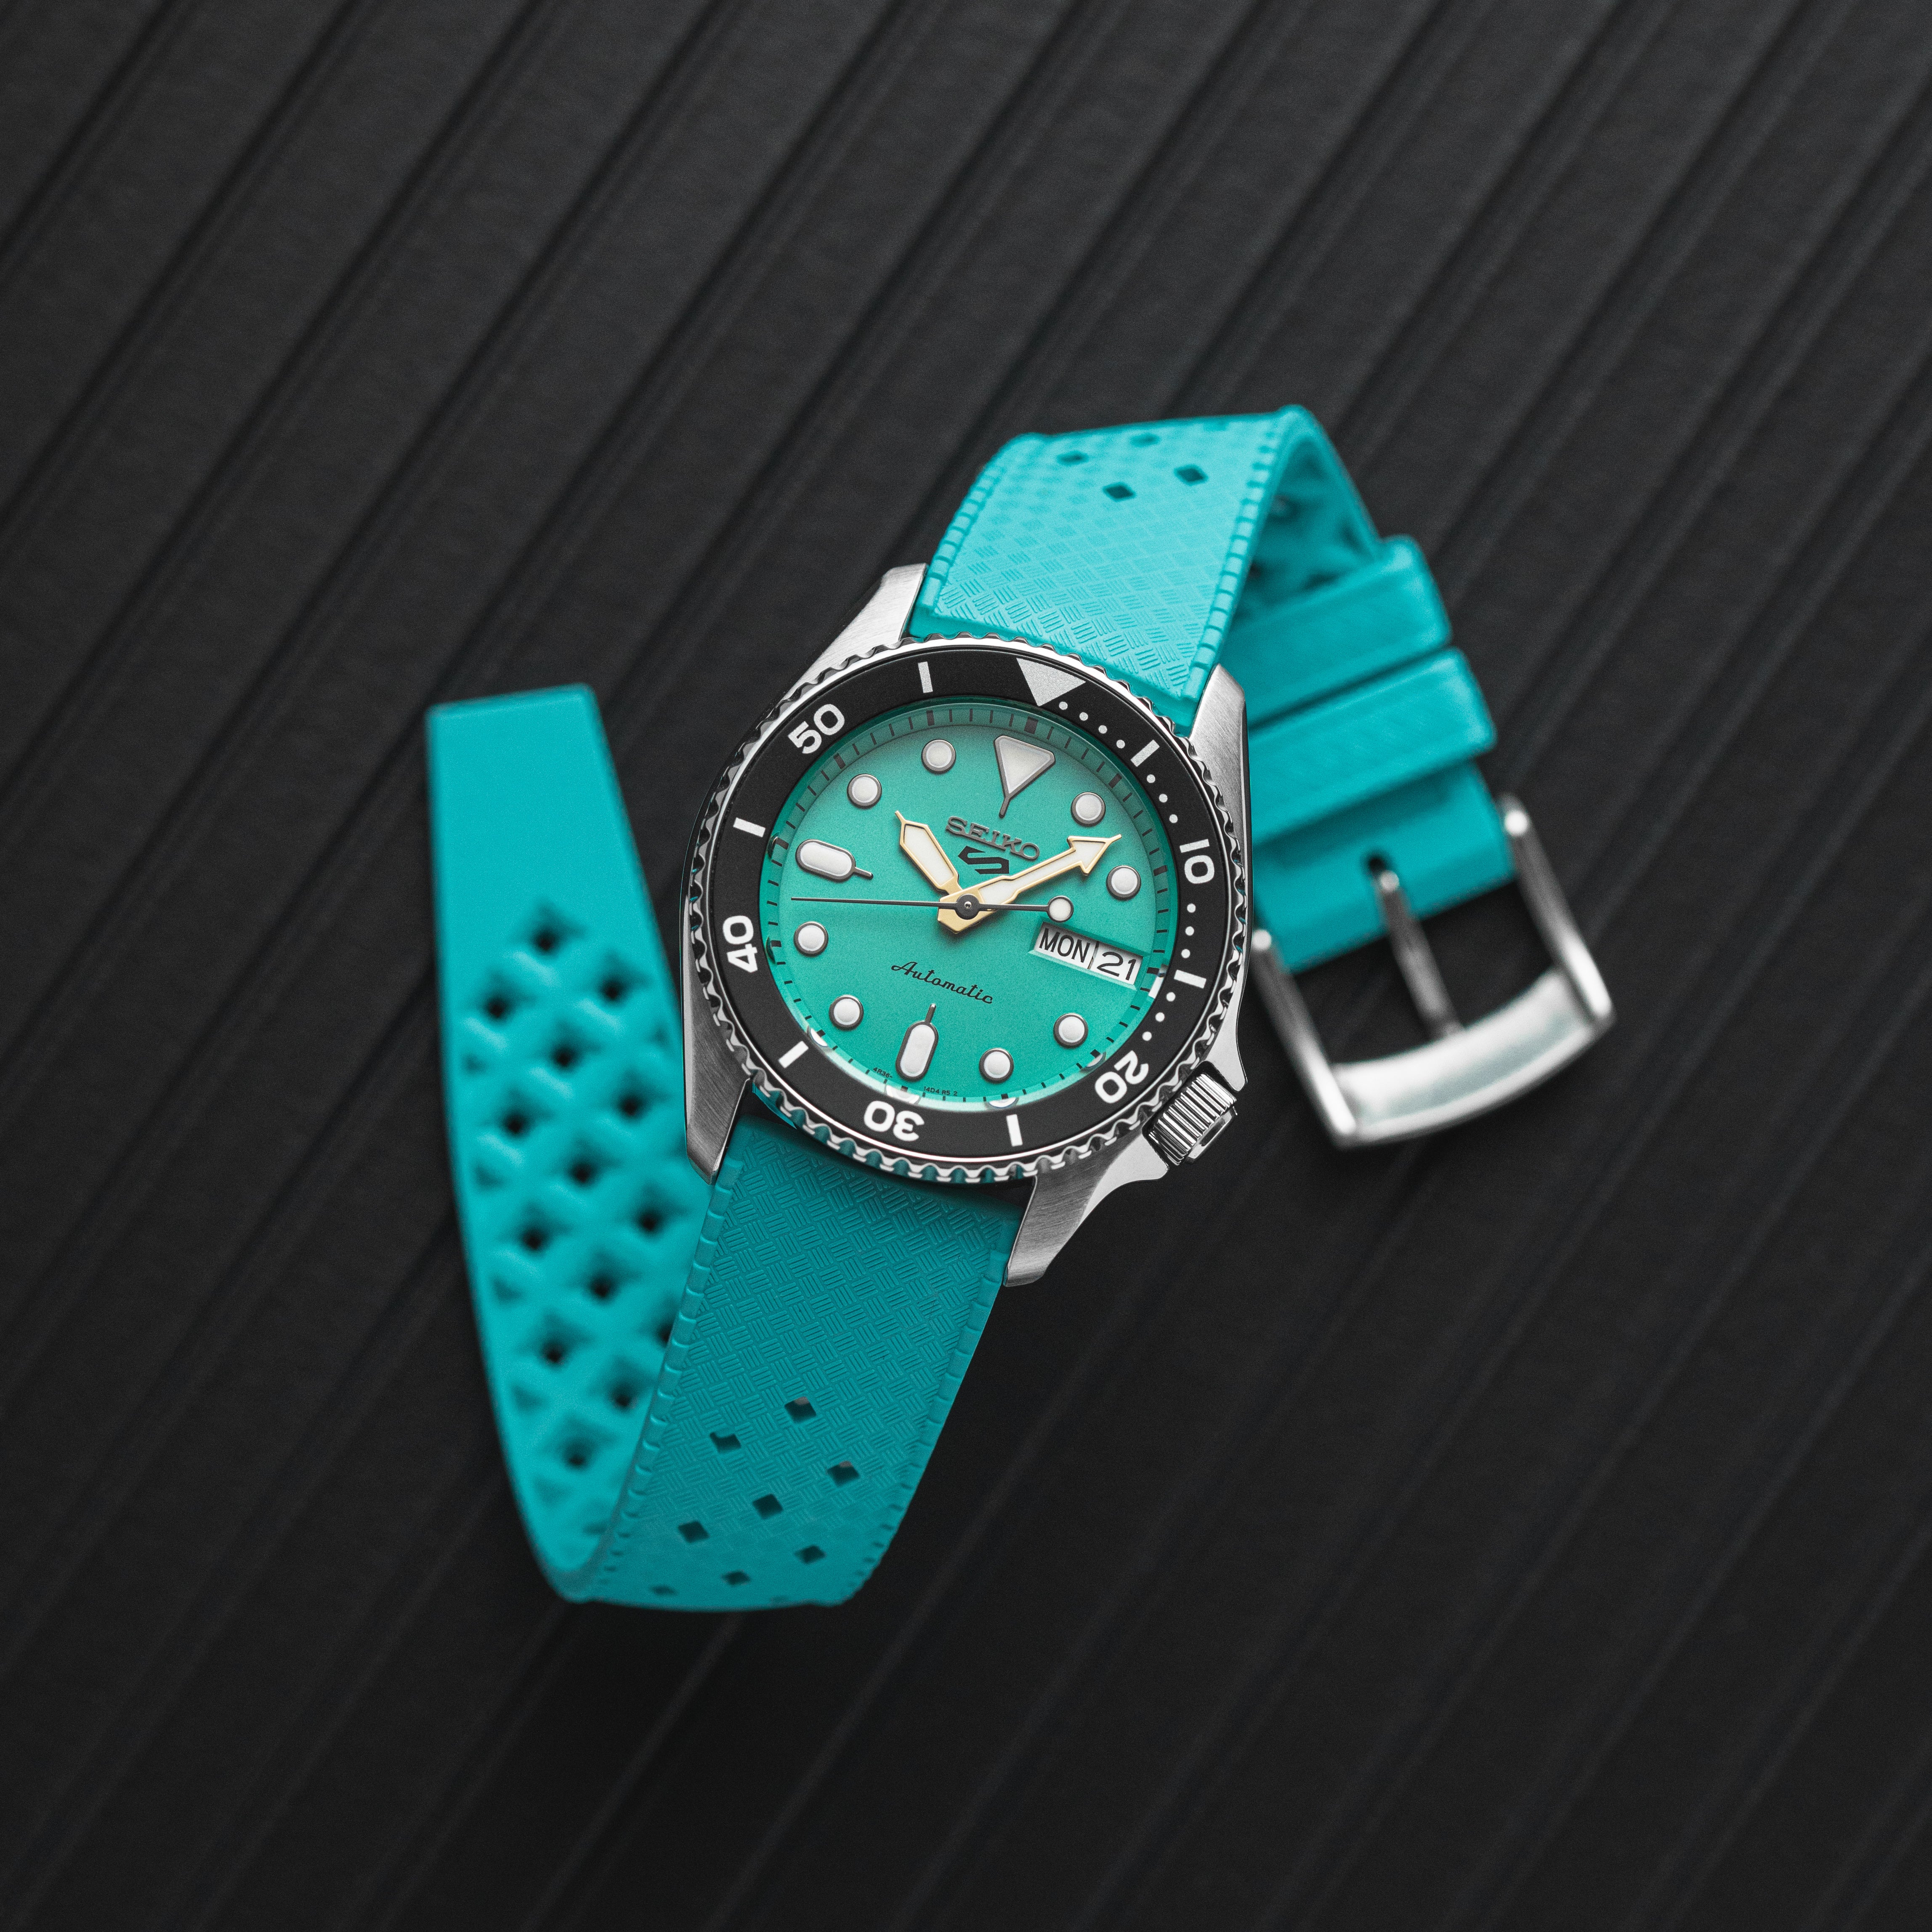 Calypso Tropical Style FKM Rubber Strap- Quick-Release-Compatible with Omega x Swatch - Green (2422)